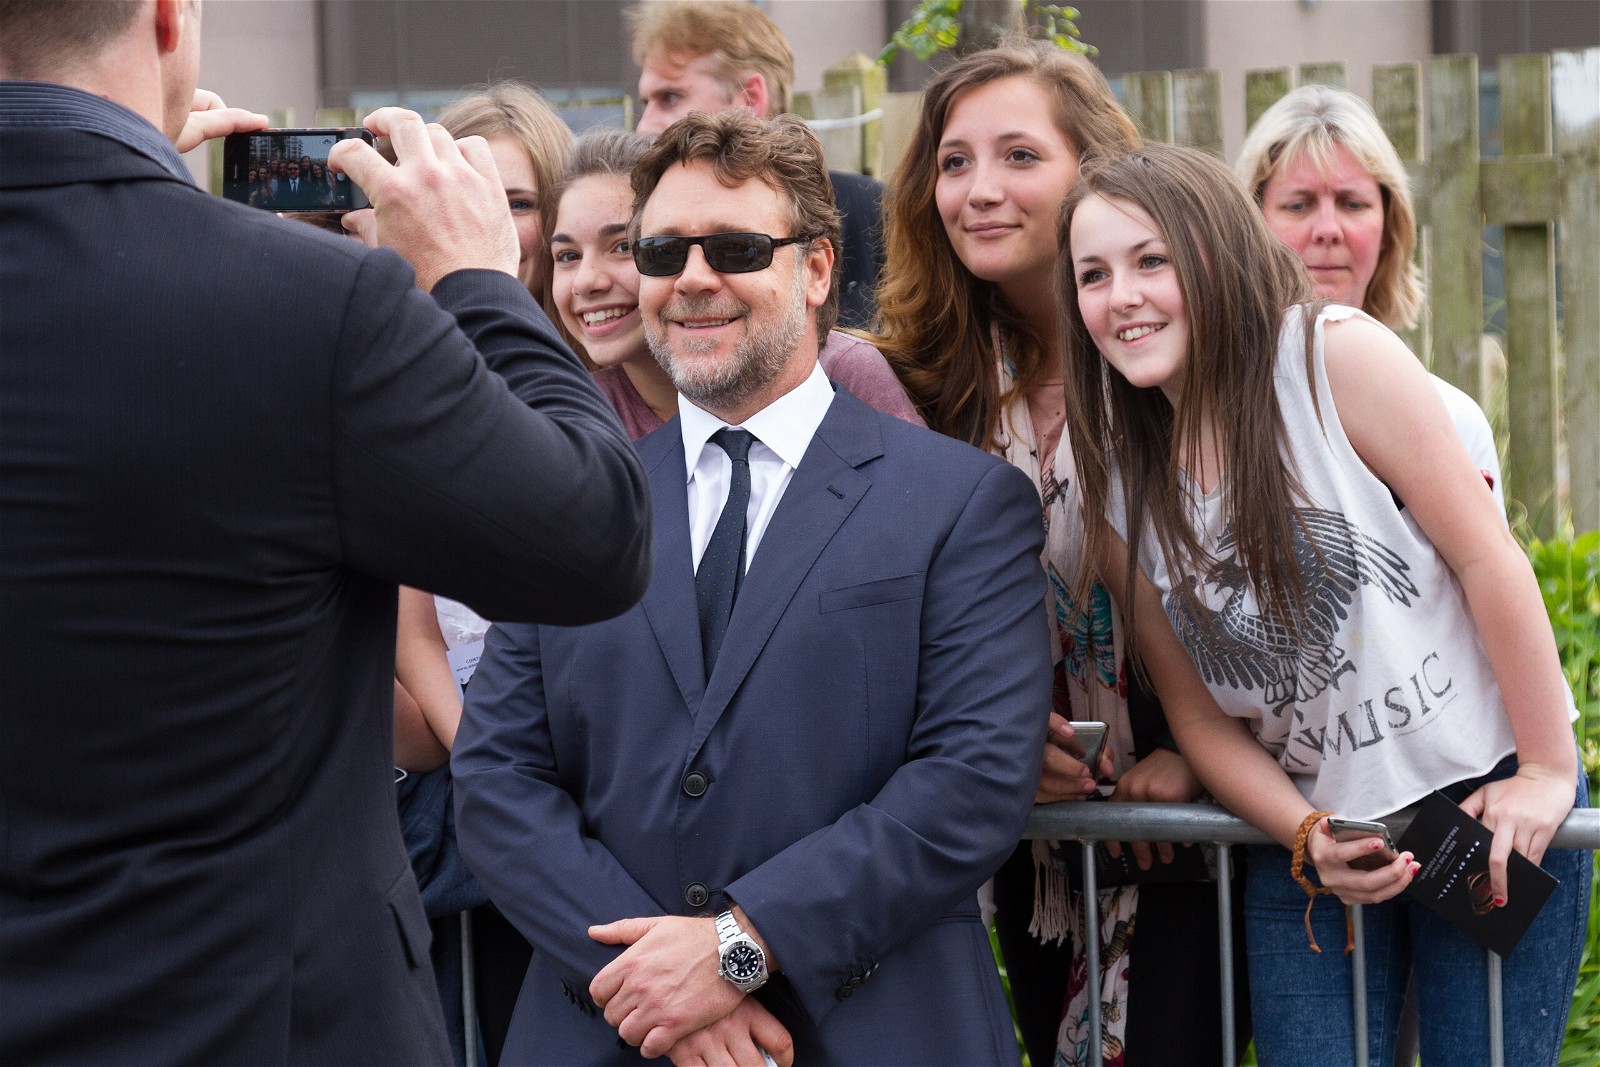 Russell Crowe smiling while posing with fans in St Helier